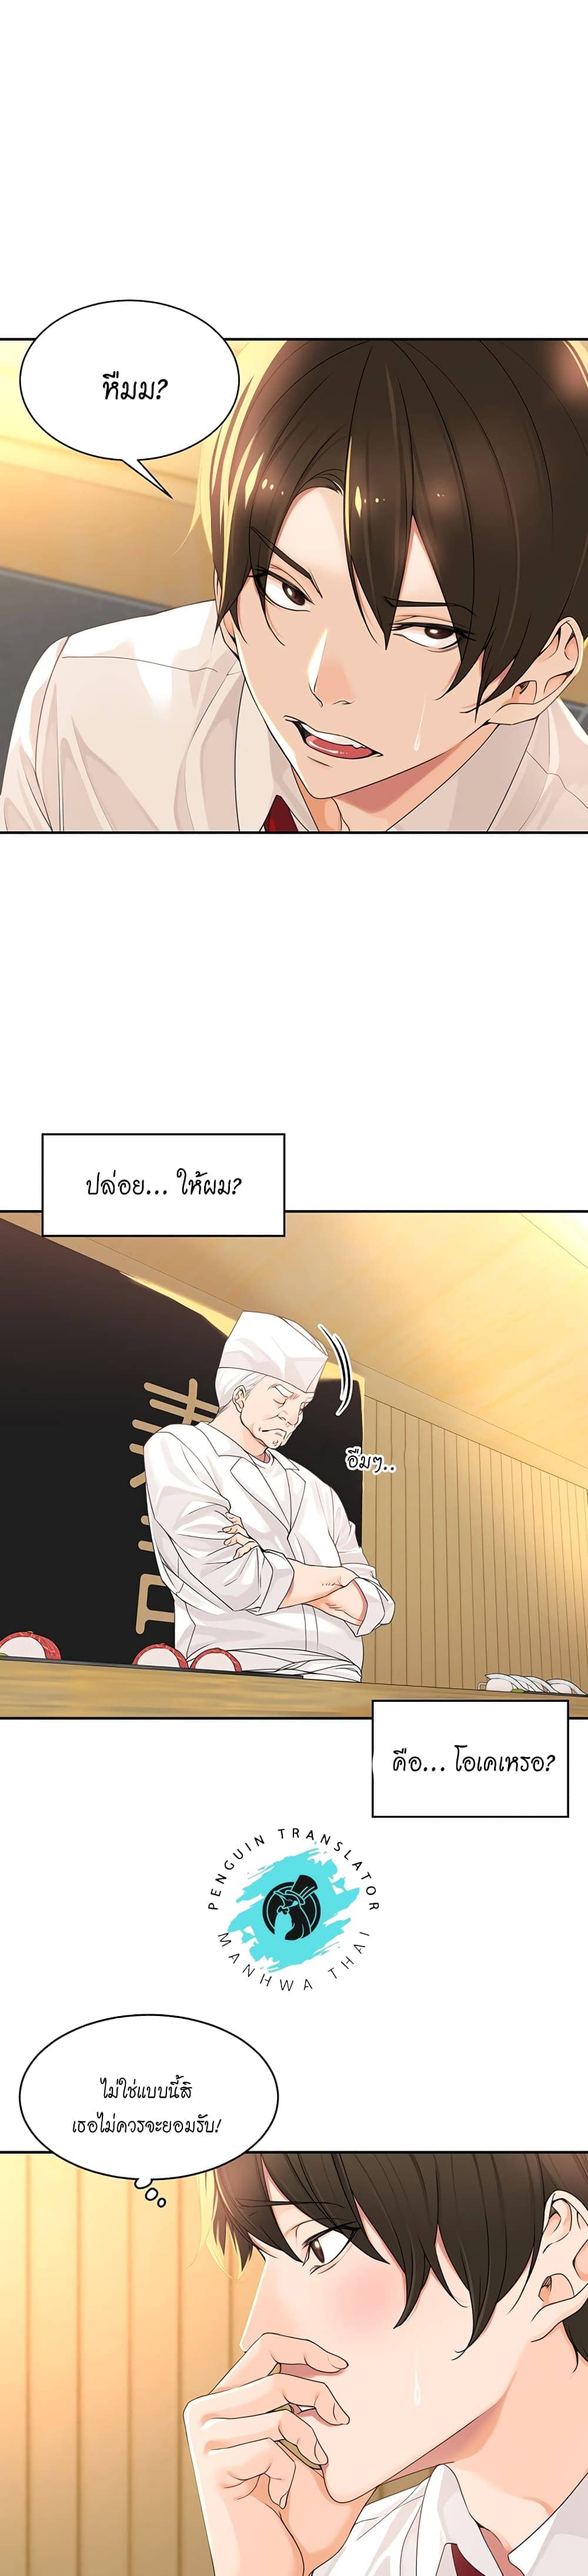 Manager, Please Scold Me ตอนที่ 2 ภาพ 12